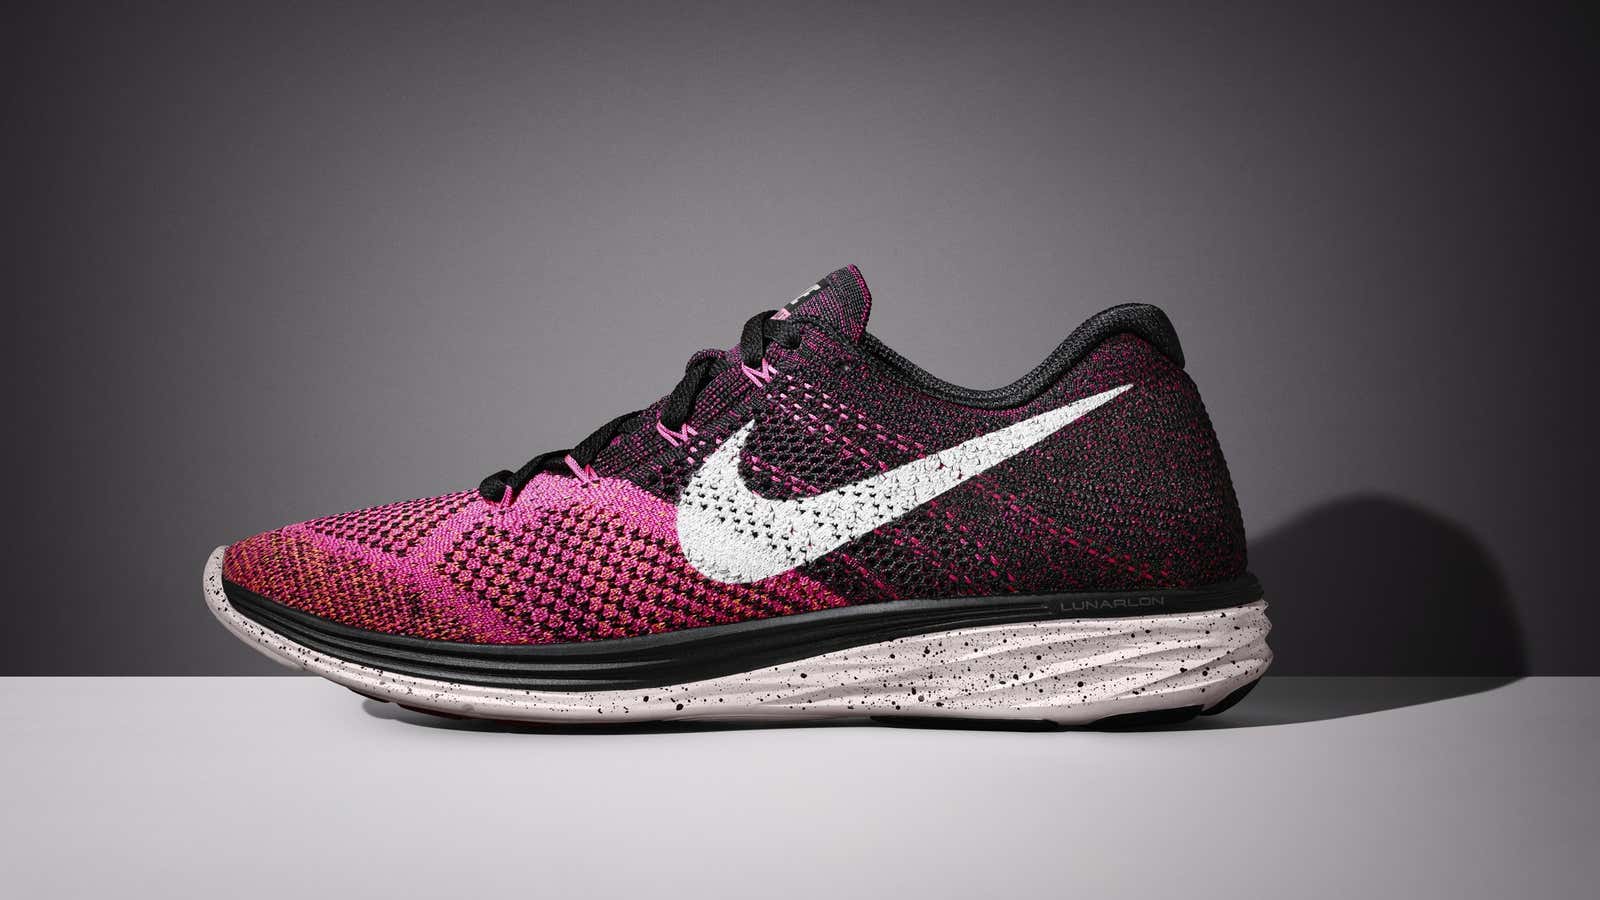 Eric Sprunk’s beloved Flyknit Lunar 3, which offers a hint about how 3D printing could be used for Nike sneakers.